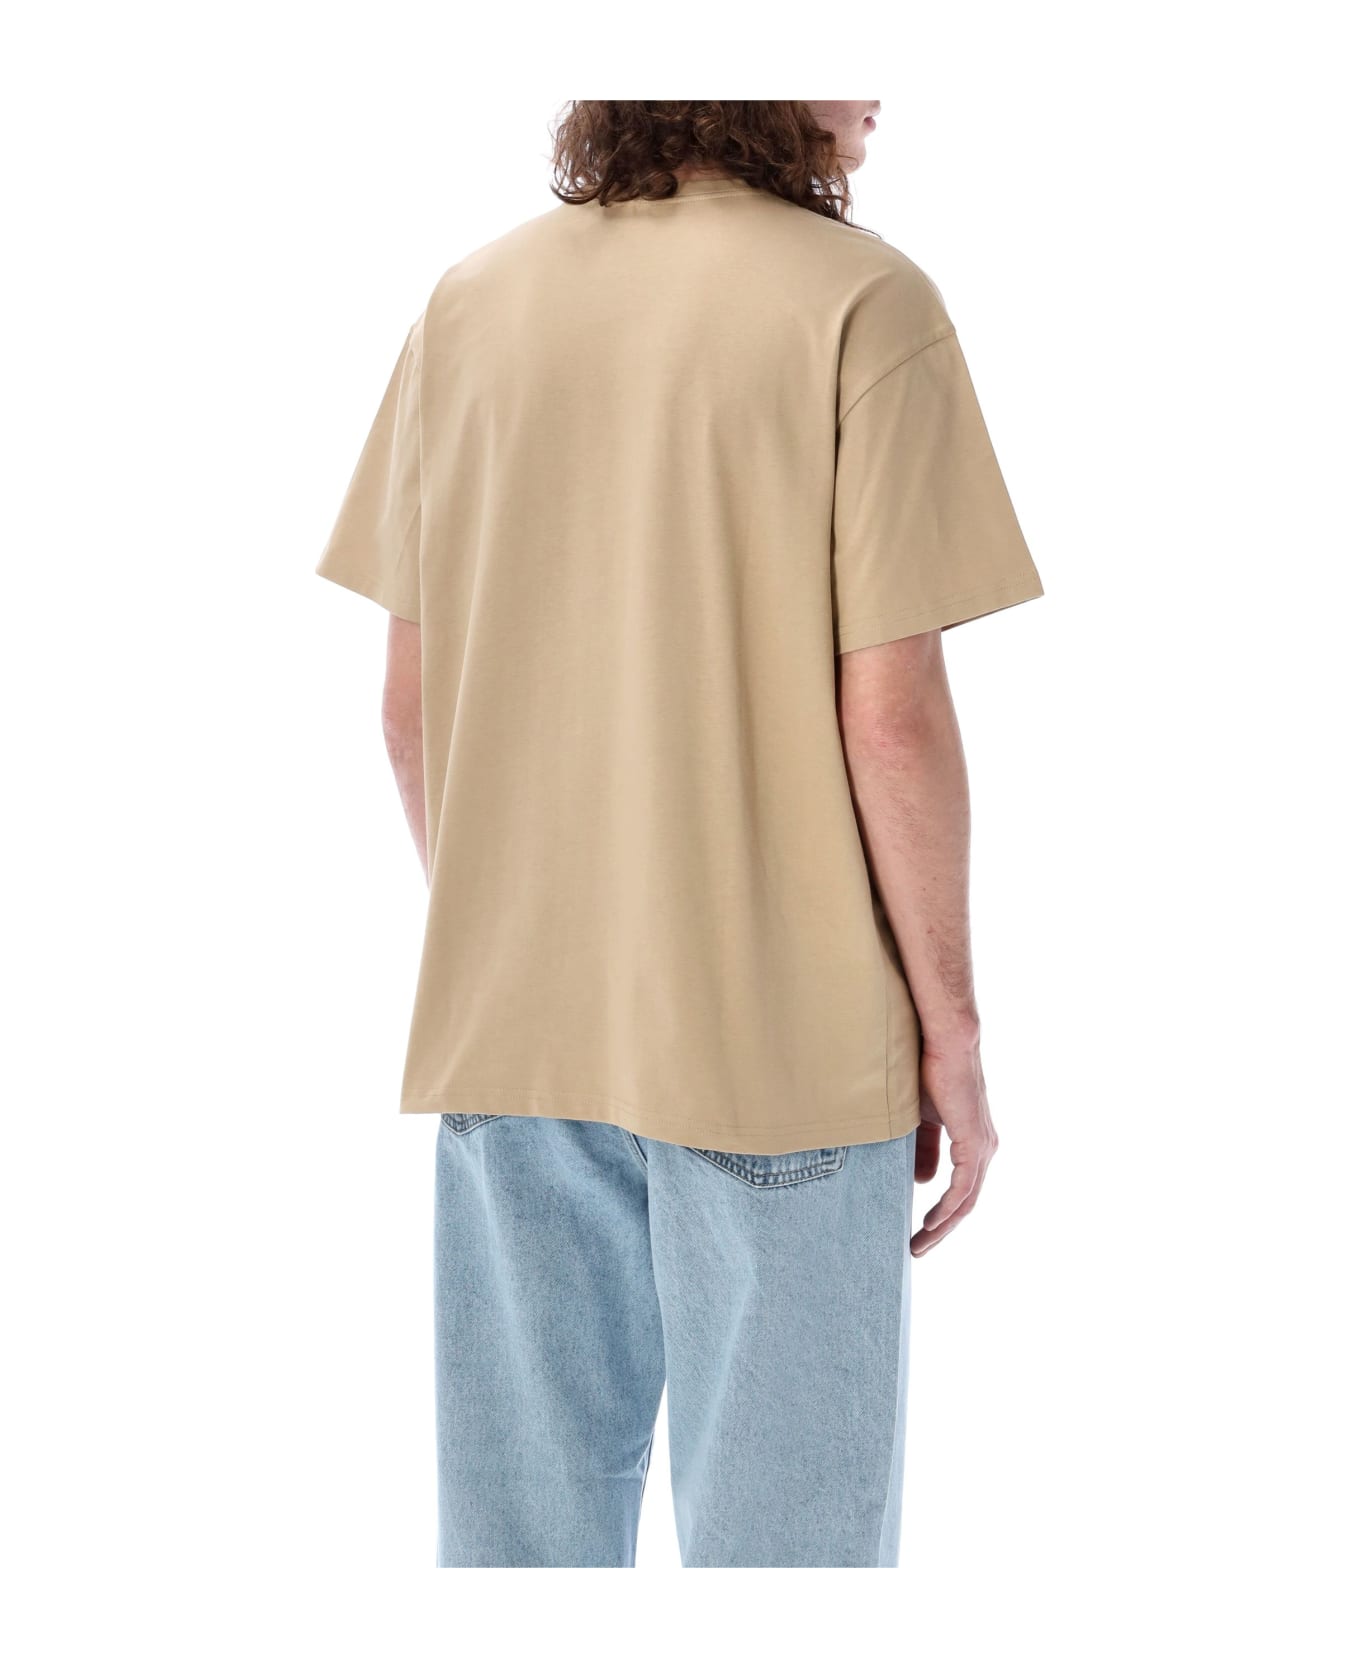 Carhartt Chase S/s T-shirt - Gold